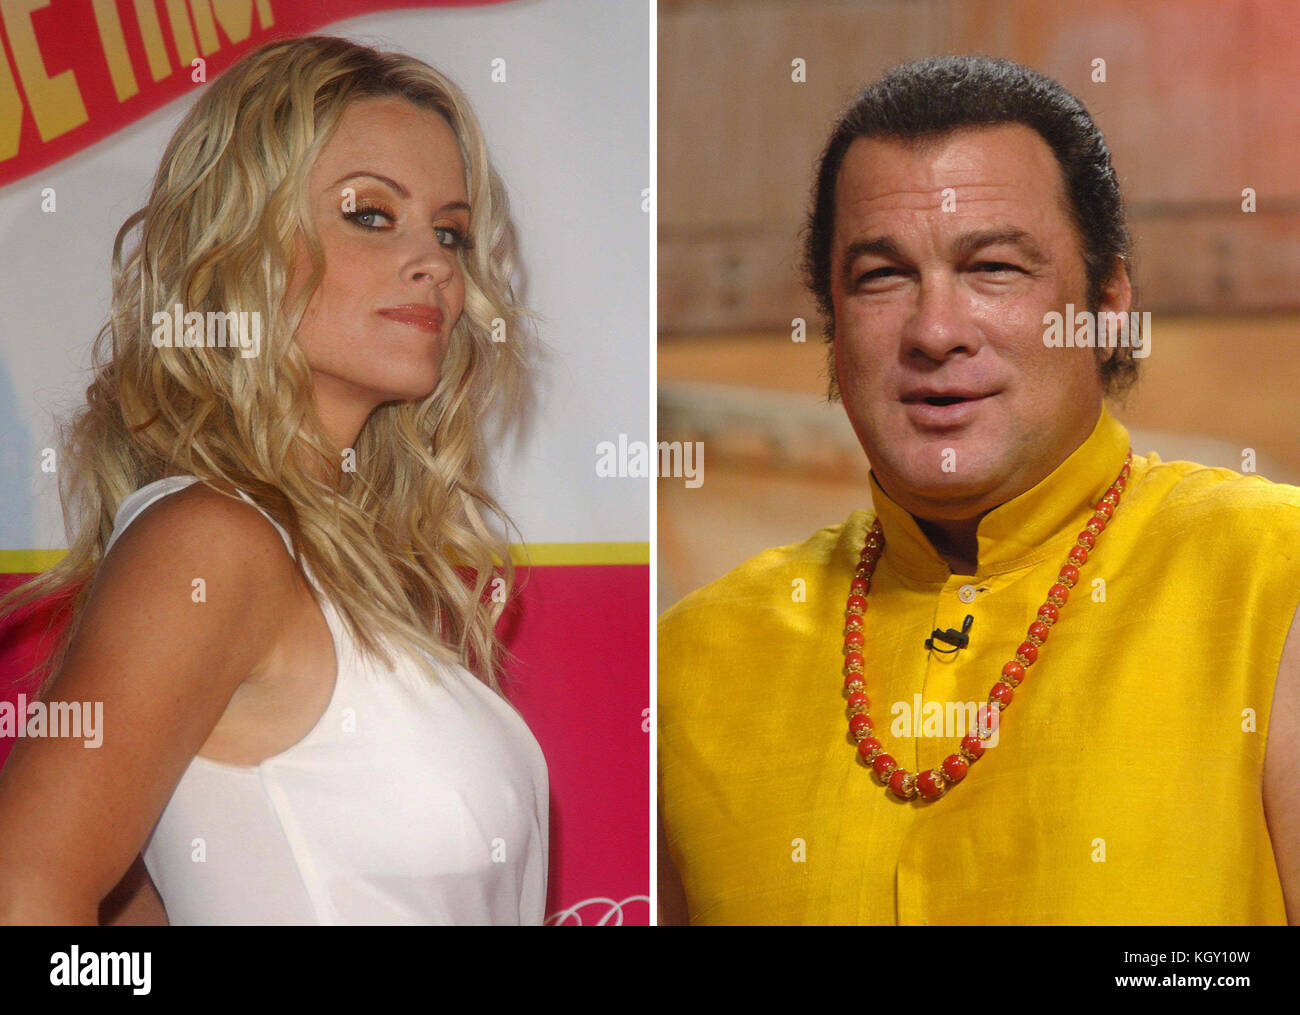 File photos of Jenny McCarthy and Steven Seagal, as the actress has claimed she was sexually harassed by the Hollywood actor. Stock Photo